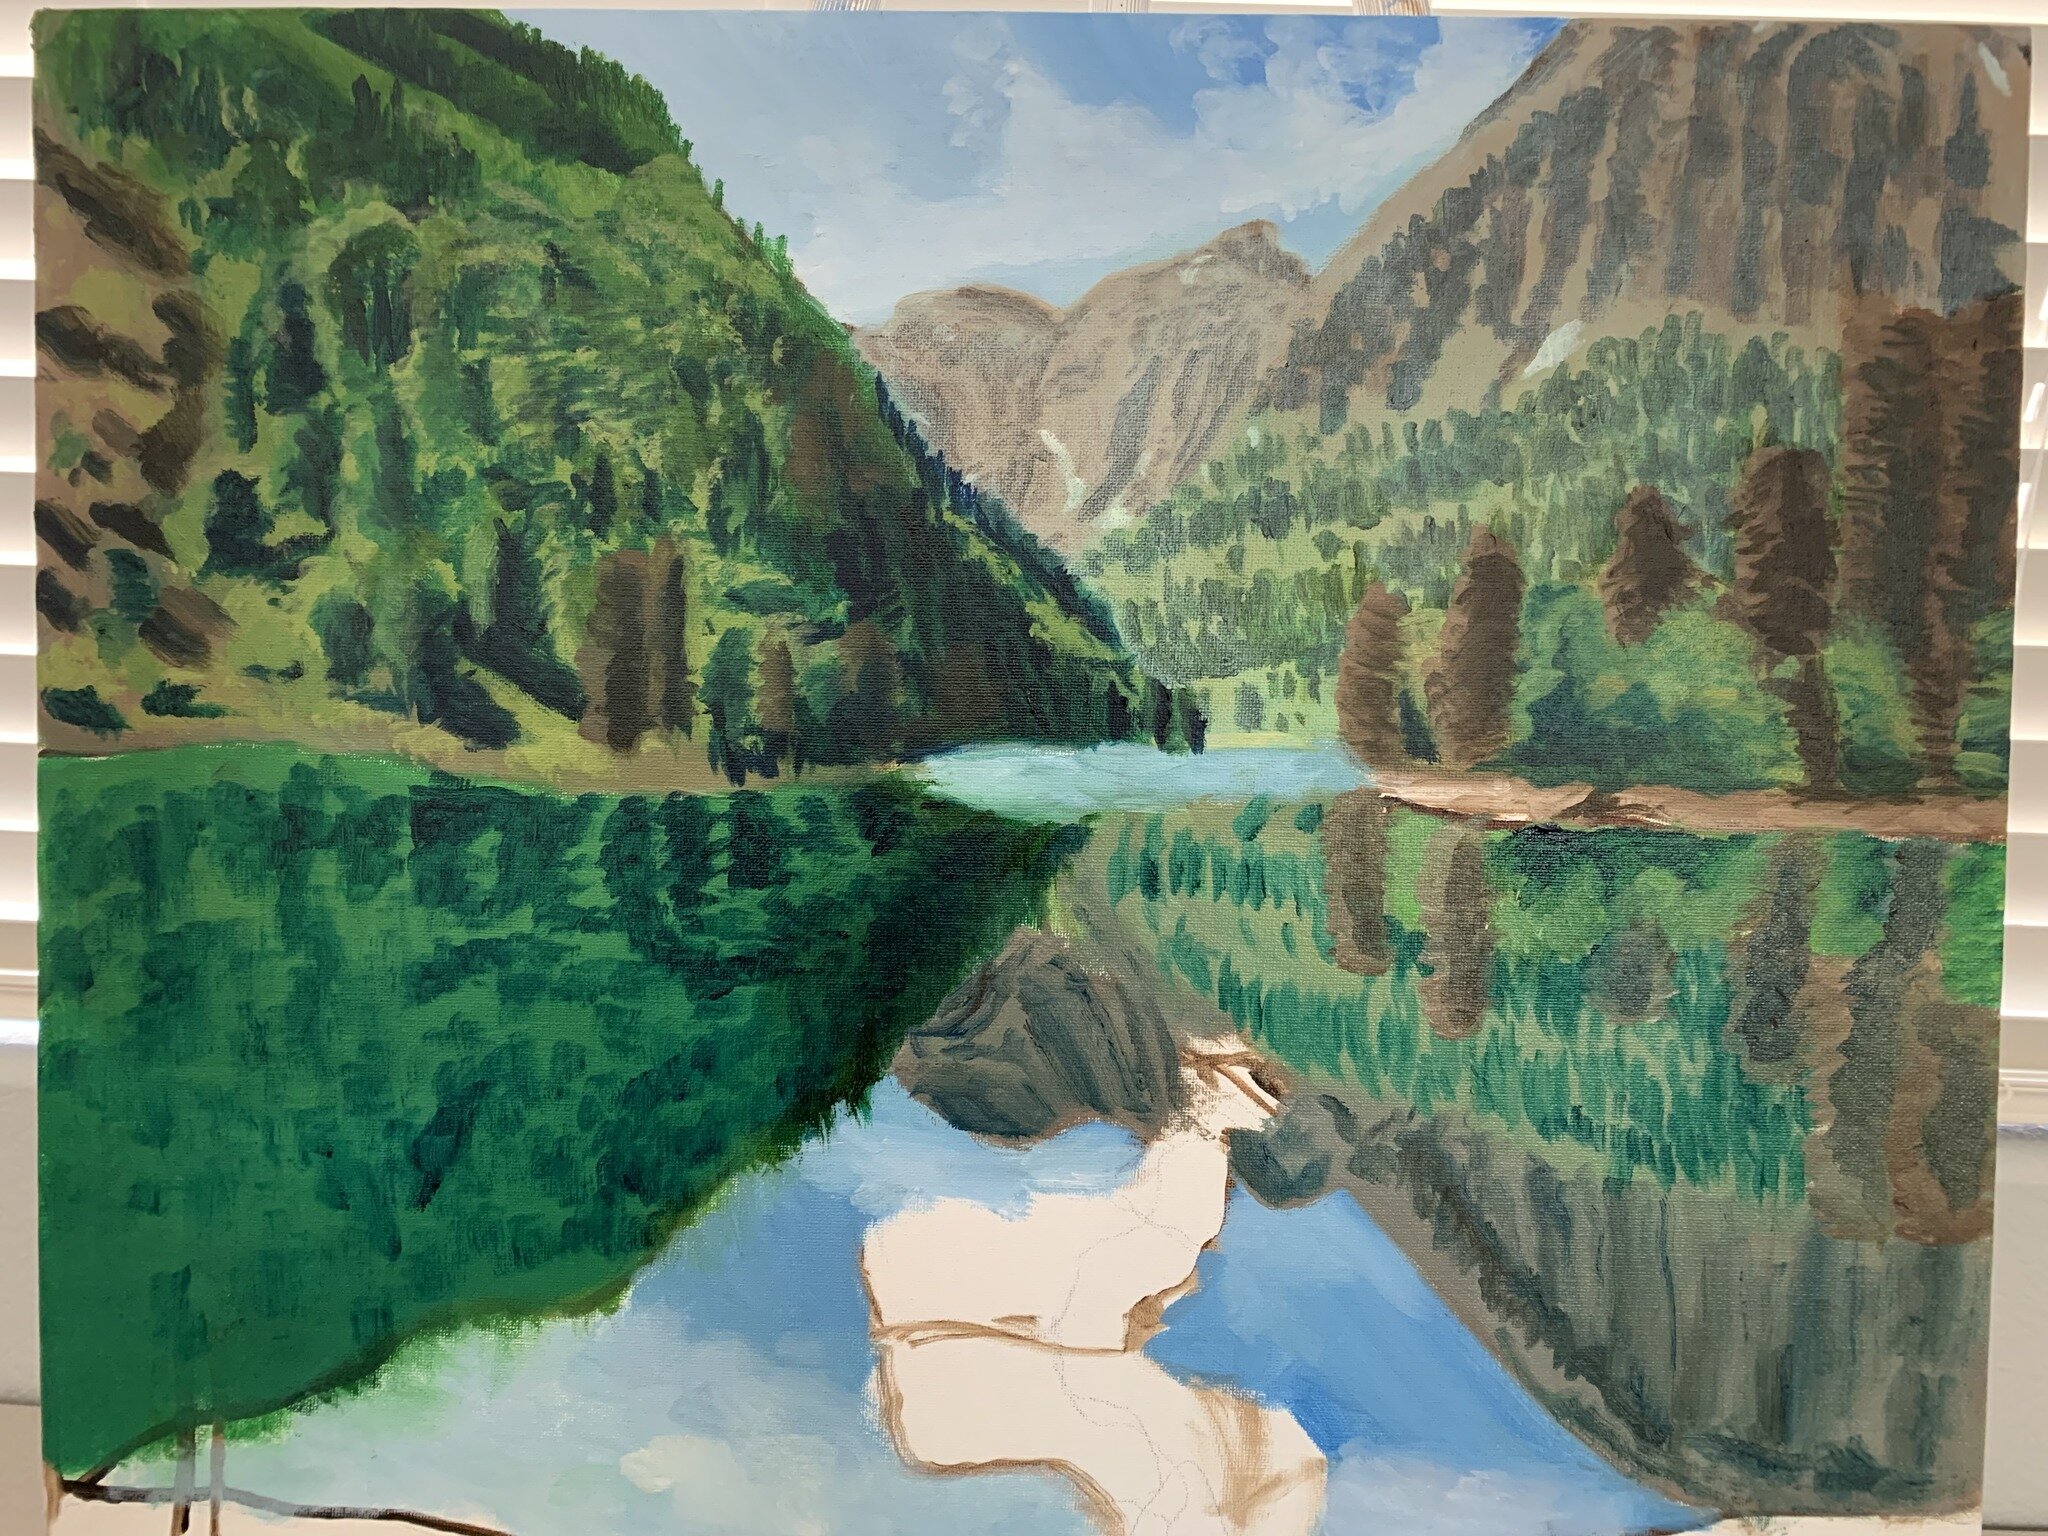 I can hardly contain my excitement - I'll be finishing up this gorgeous oil painting tomorrow! This mountain landscape with an elk and a reflection in the water is truly a masterpiece, and I can't wait to share the finished product with you. If you'r